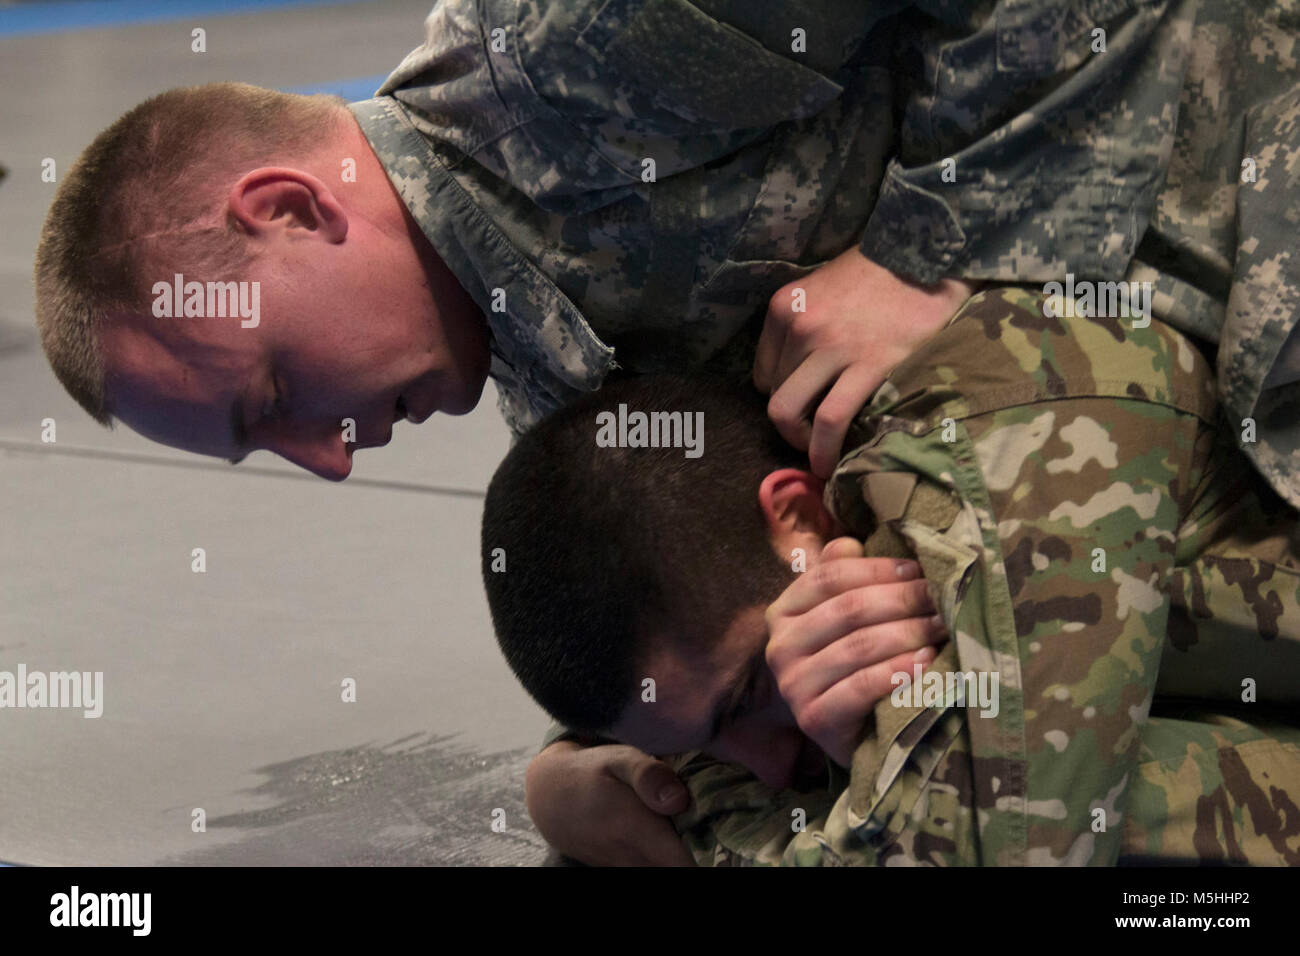 Spc. Ethan Stevens a 3rd Infantry Division combatives team member assigned to Company H., 3rd Battalion, 67th Armor Regiment, 2nd Armored Brigade Combat Team grapples a 3ID Soldier at a chaplain’s inspirational combatives training session, February 13, 2018, at Fort Stewart, Ga. 3ID Soldiers training in close quarters combatives level I as well as the Fort Stewart combatives team were tasked with executing a series of instructed grappling techniques paired alongside inspirational guidance from Capt. Andrew Alterman, the 9th Engineers Battalion, 2nd Armored Brigade Combat Team, 3ID chaplain. (U Stock Photo